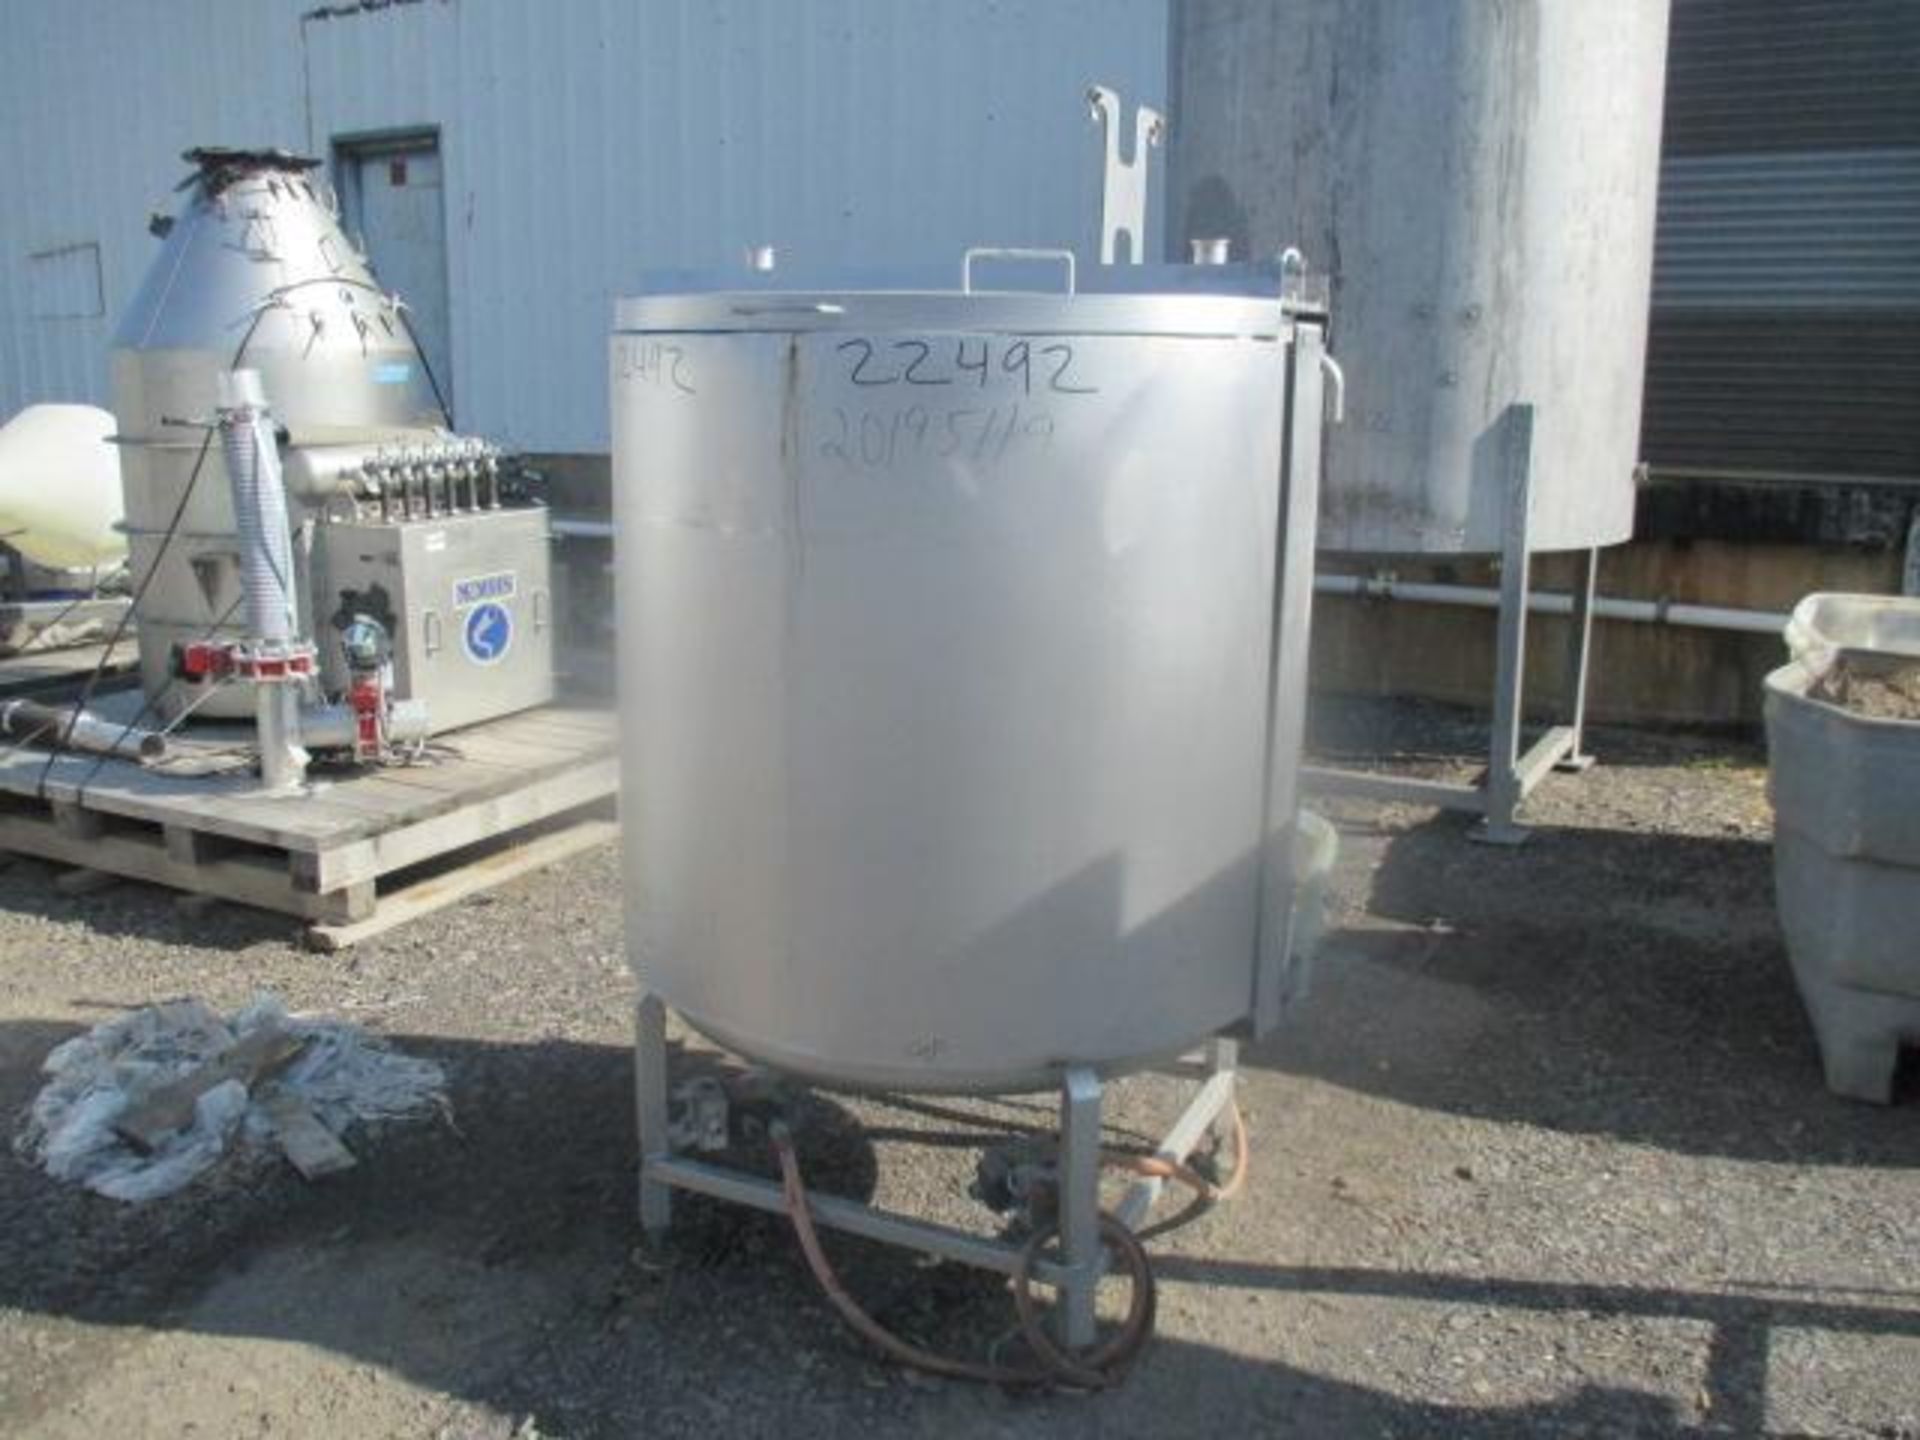 300 GALLON JACKETED STAINLESS STEEL TANK, MEASURES 4' DEEP AND 44" DIAMETER - Image 5 of 5